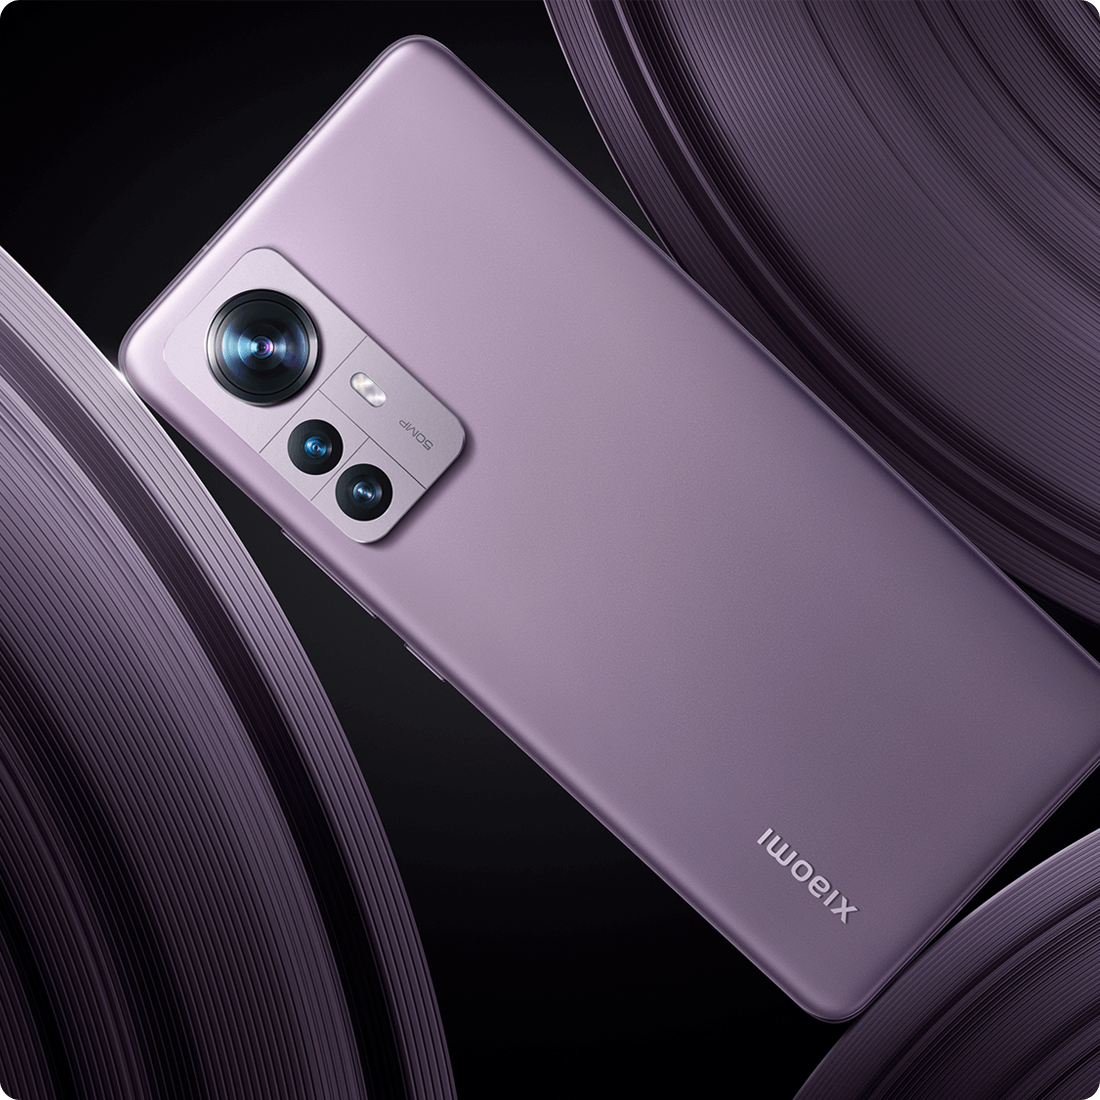 The Xiaomi Next 2022 launches have changed my perception about the brand